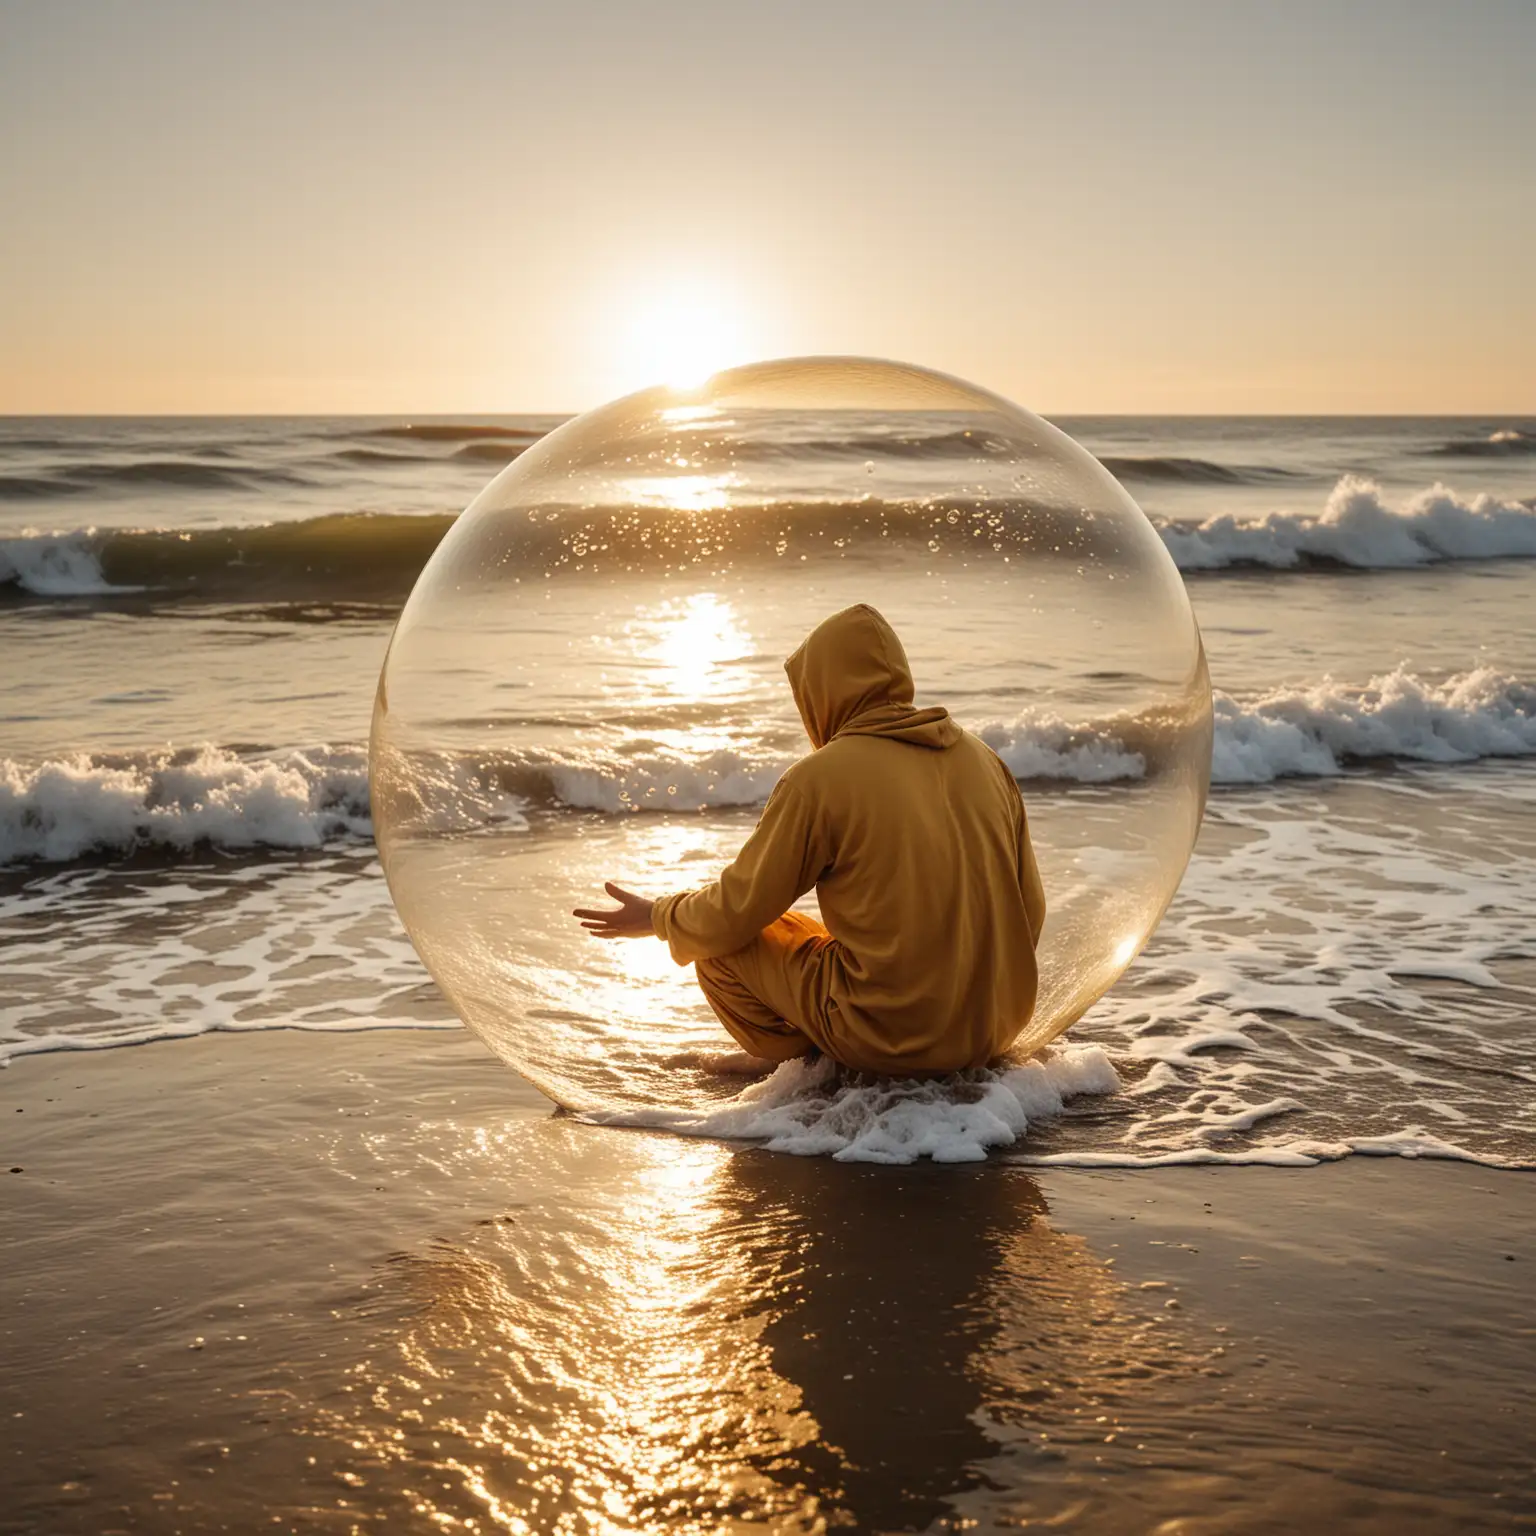 Man in Golden Tunic Observing Reflection on Seashore Bubble